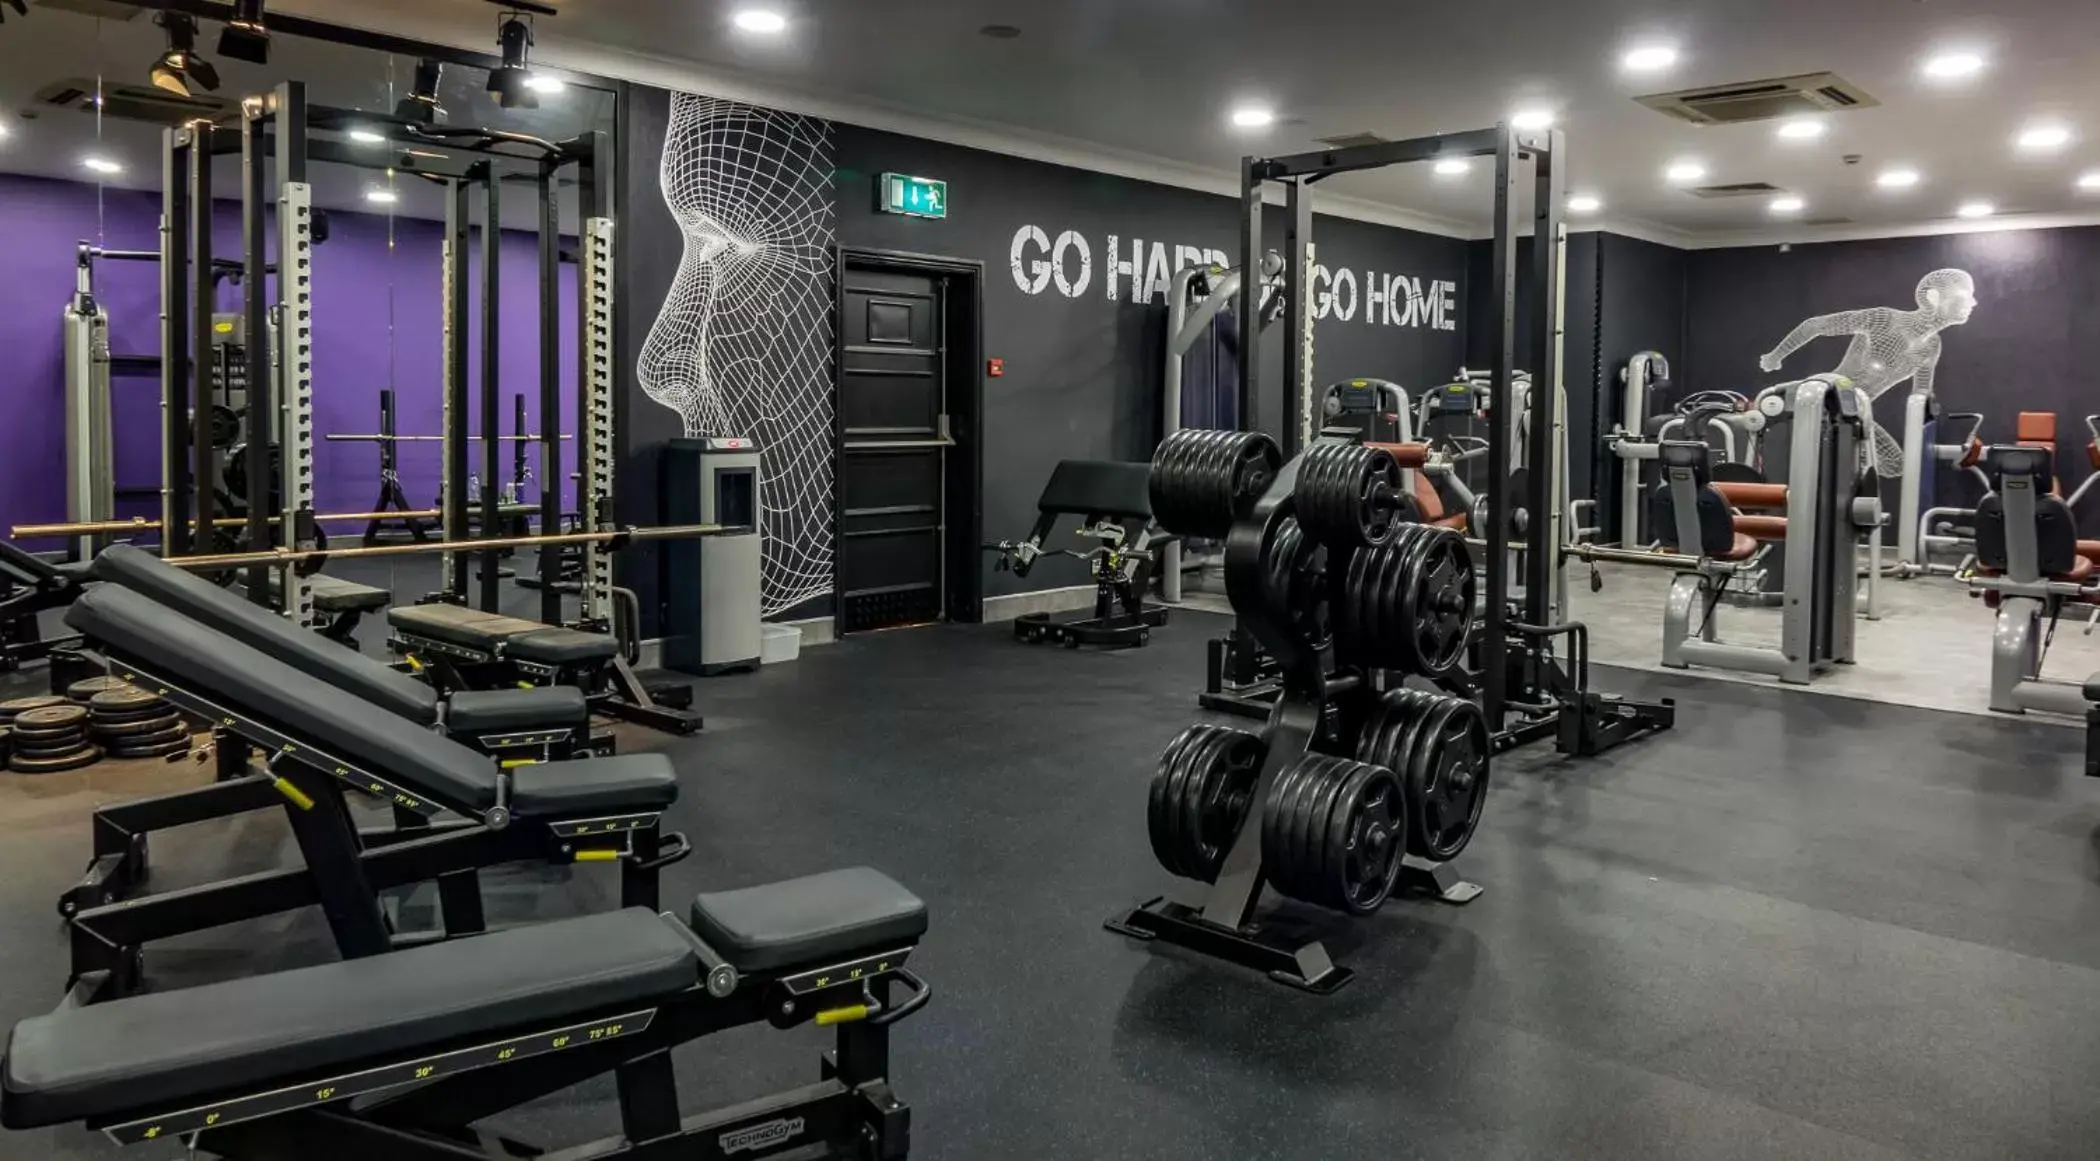 Fitness centre/facilities, Fitness Center/Facilities in Midleton Park Hotel